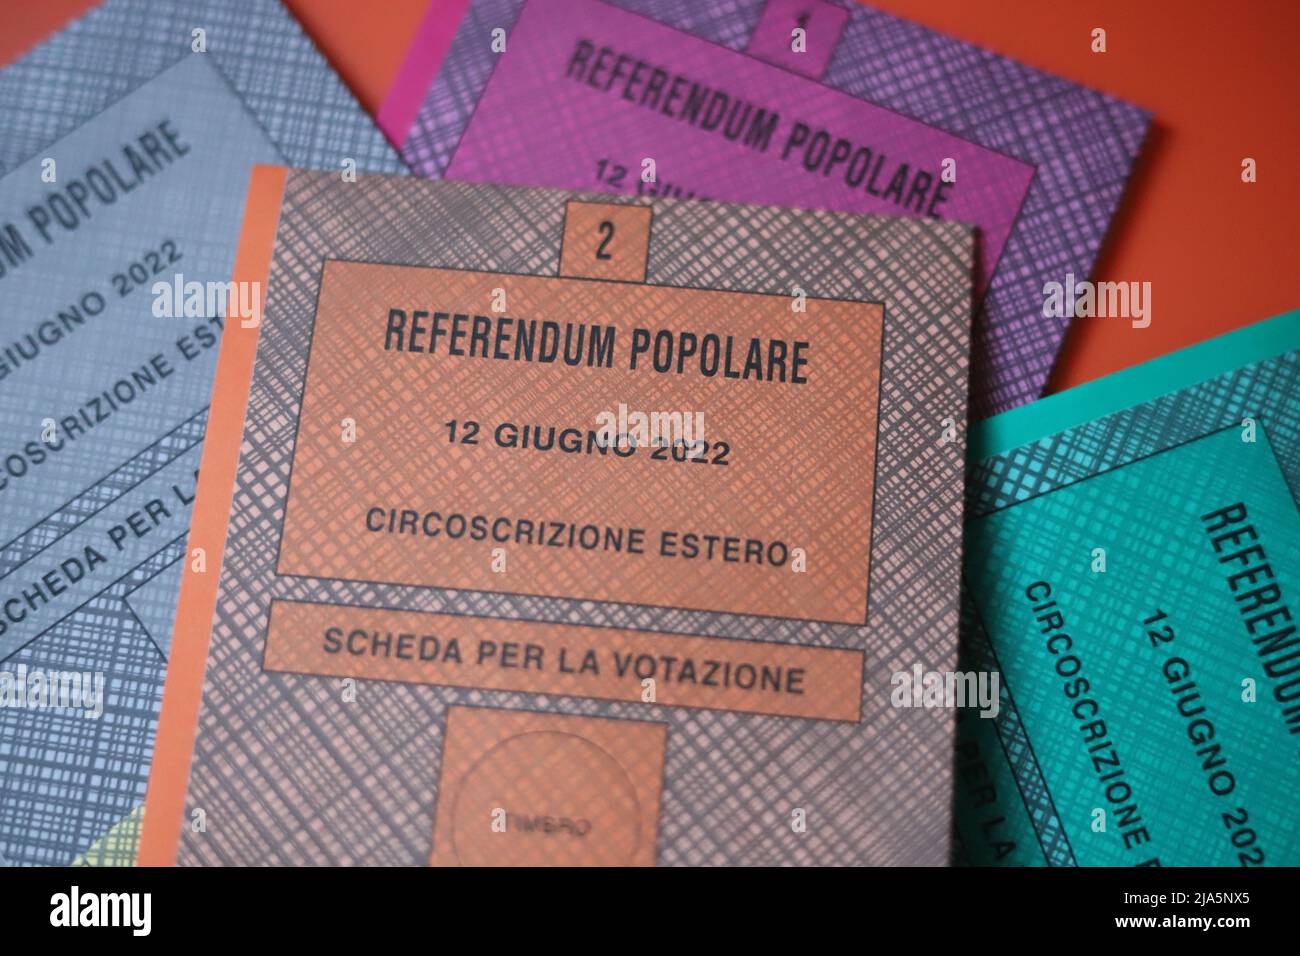 Rome, Italy. 27th May, 2022. Italian citizens living abroad are receiving letters with information about the 'Referendum Popolari Abrogativi 12 Giugno 2022' the Popular Repeal Referendums on June 12, 2022.  1. red ballot for Referendum No. 1: repeal of the Consolidated Text of the provisions on incandidability and prohibition from holding elective and government posts resulting from final sentences for non-culpable offences 2. orange ballot for referendum No 2: limitation of precautionary measures: repeal of the last sentence of Article 274(1)(c) of the Code of Criminal Procedure Stock Photo